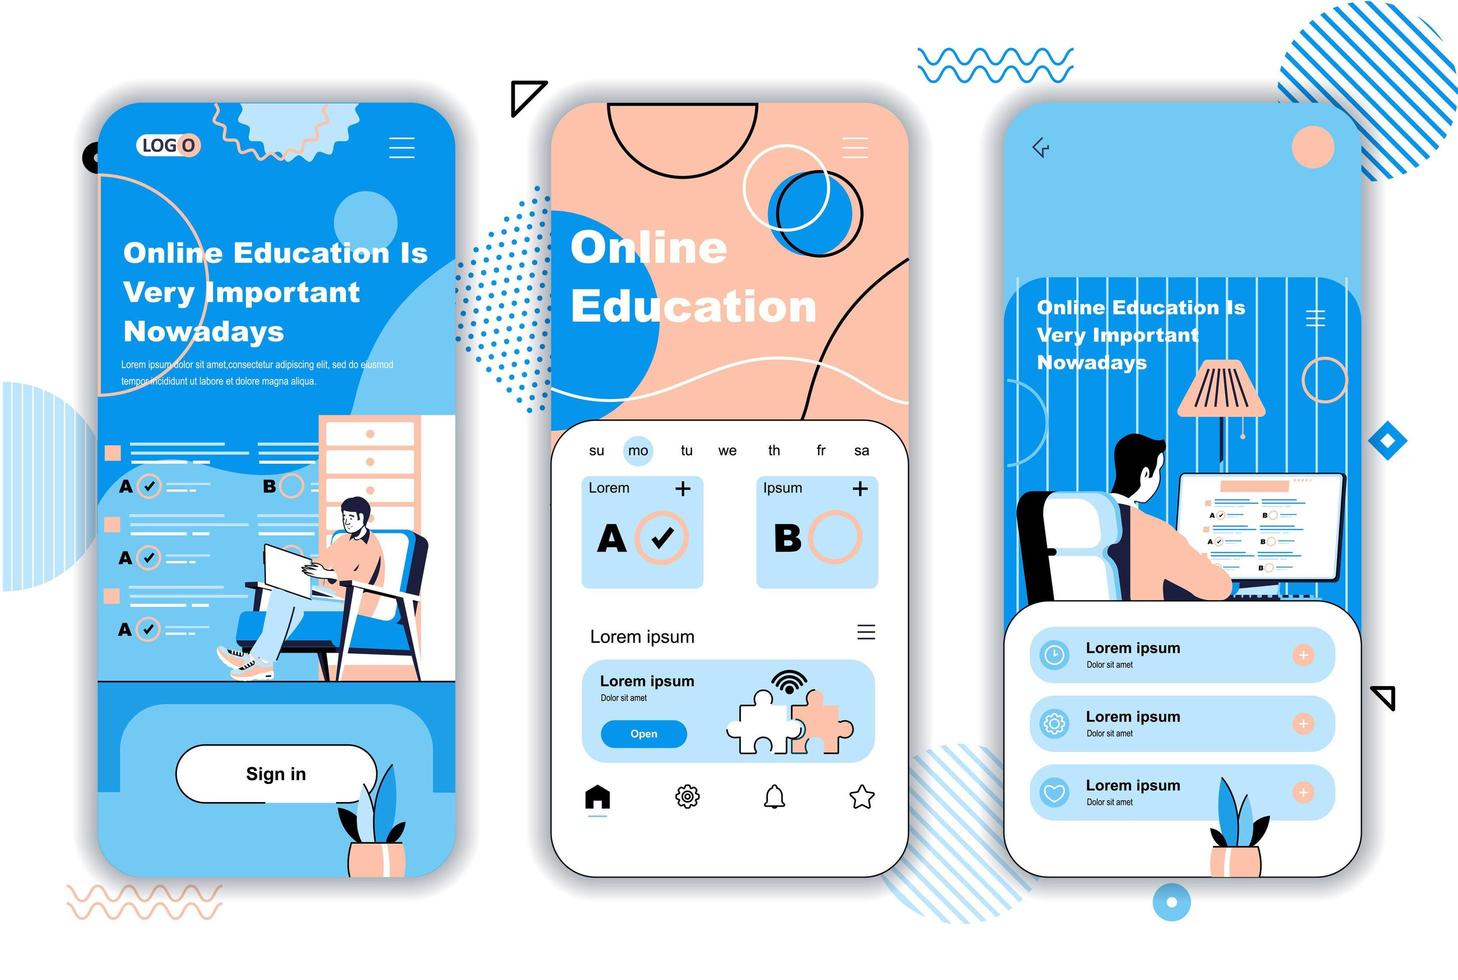 Online education concept onboarding screens for mobile app templates. Video courses, e-learning, distance study. UI, UX, GUI user interface kit with people scenes for web design. Vector illustration